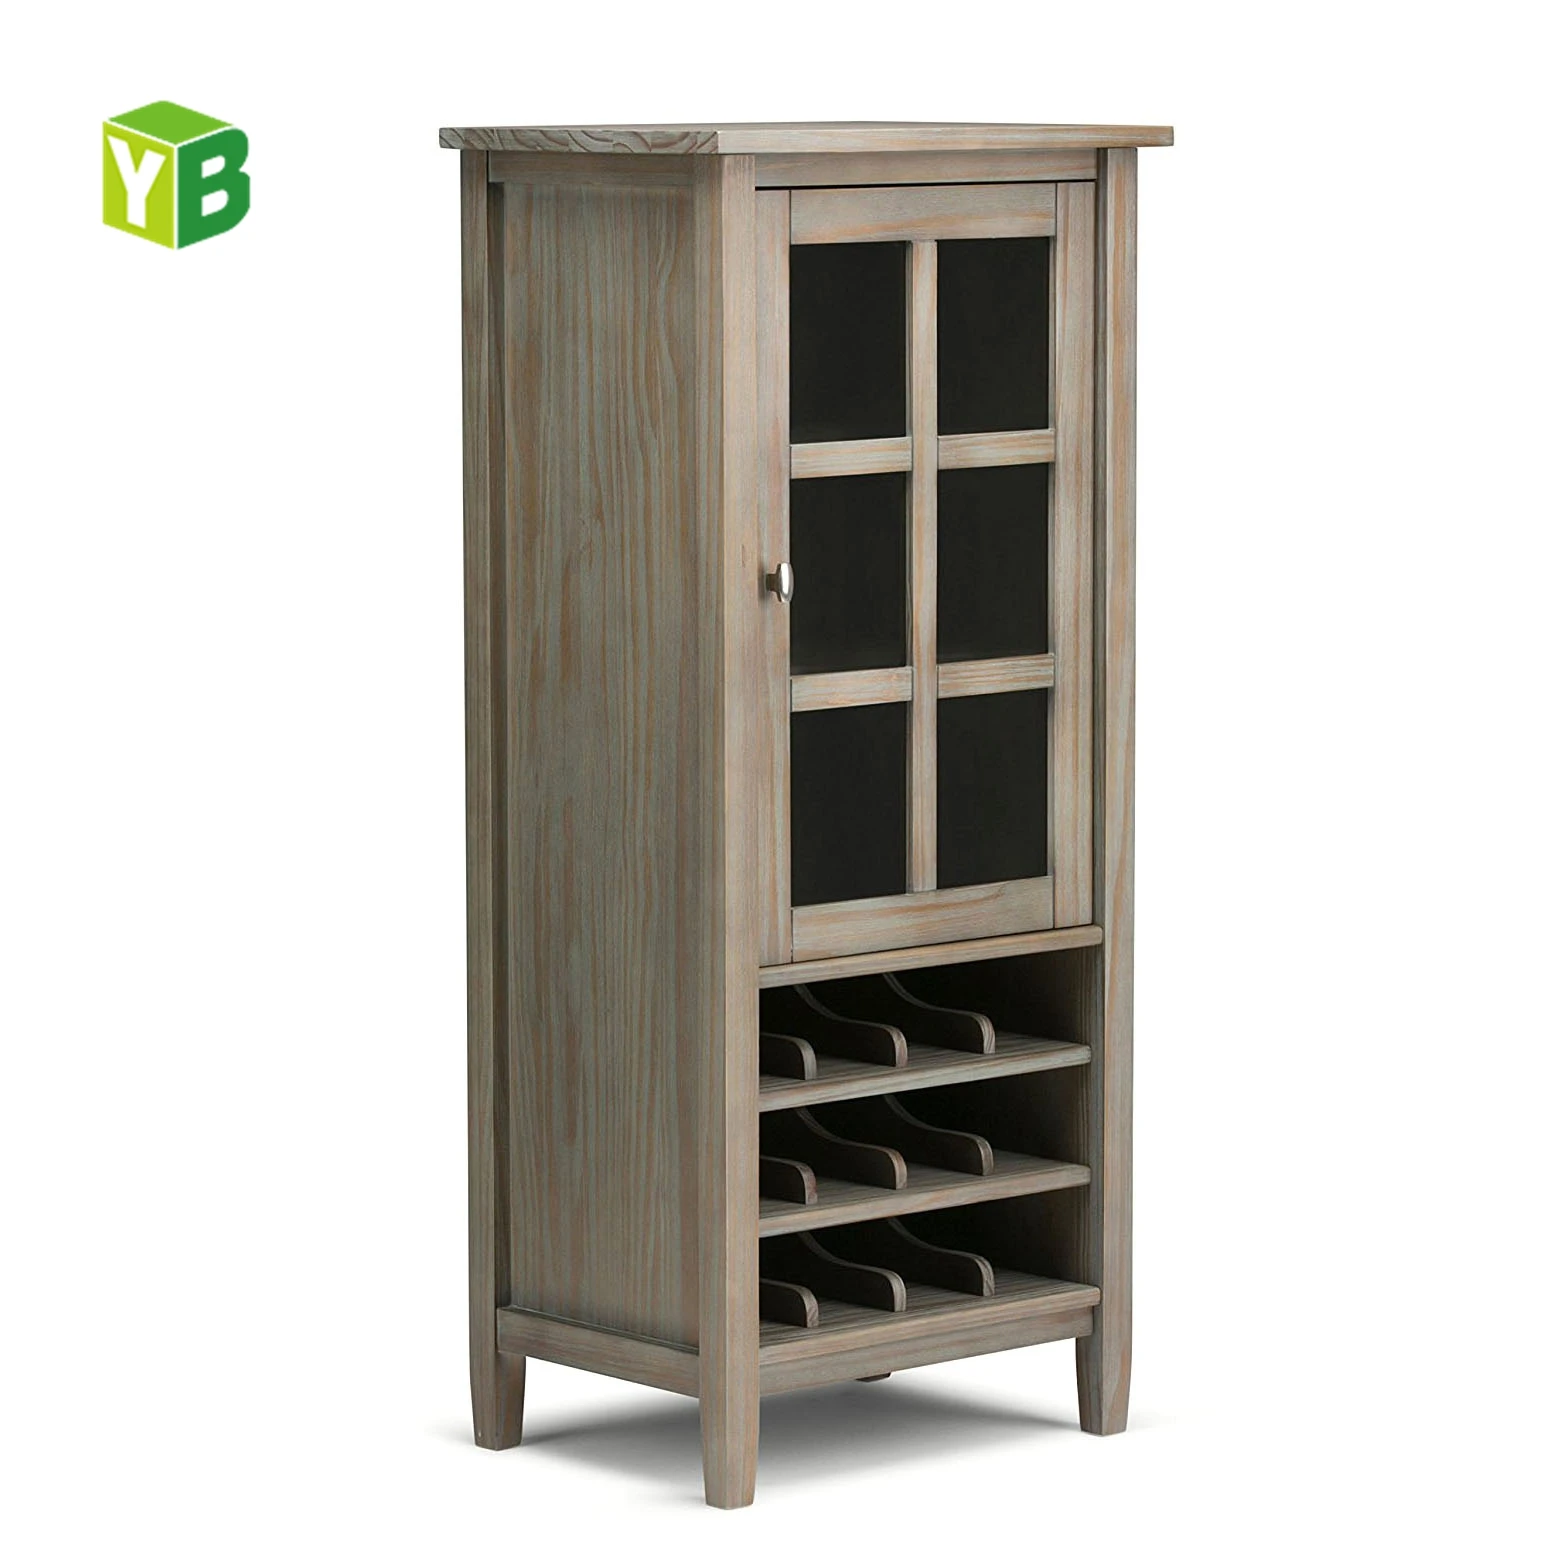 Wooden Whiskey Display Whisky Cabinet Buy Whisky Cabinet